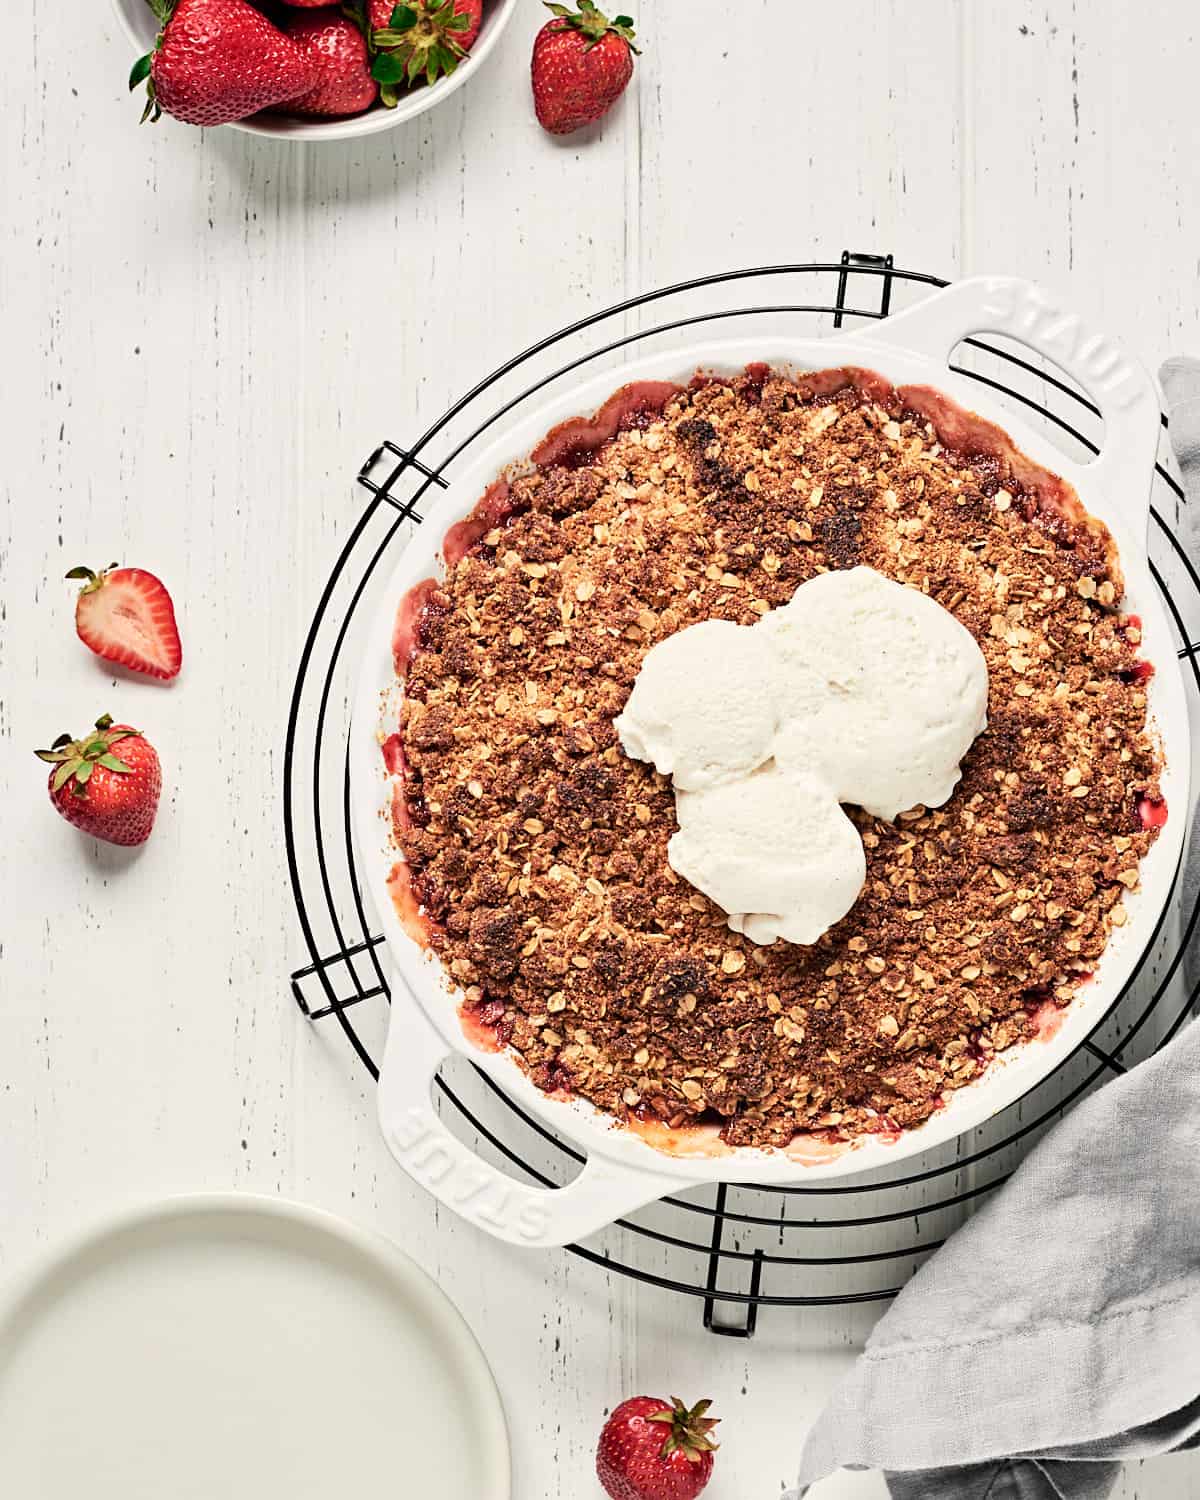 Top view of vegan strawberry Rhubarb Crisp on white wooden background.